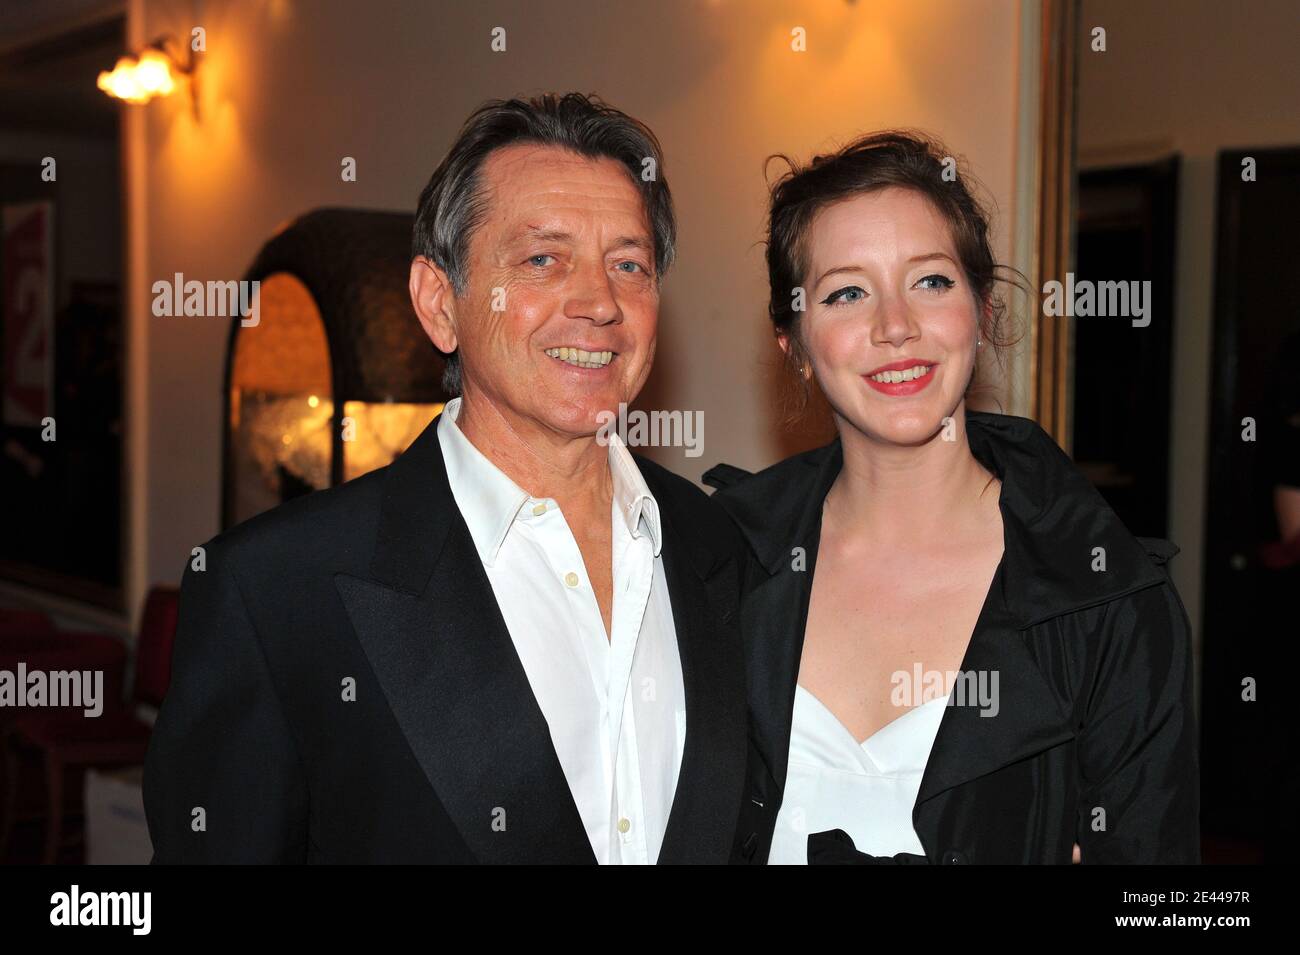 Bernard Giraudeau and his daughter Sara Giraudeau attend the 23rd Molieres ceremony at the Paris Theater in Paris, France on April 26, 2009. Photo by Gouhier-Nebinger/ABACAPRESS.COM Stock Photo